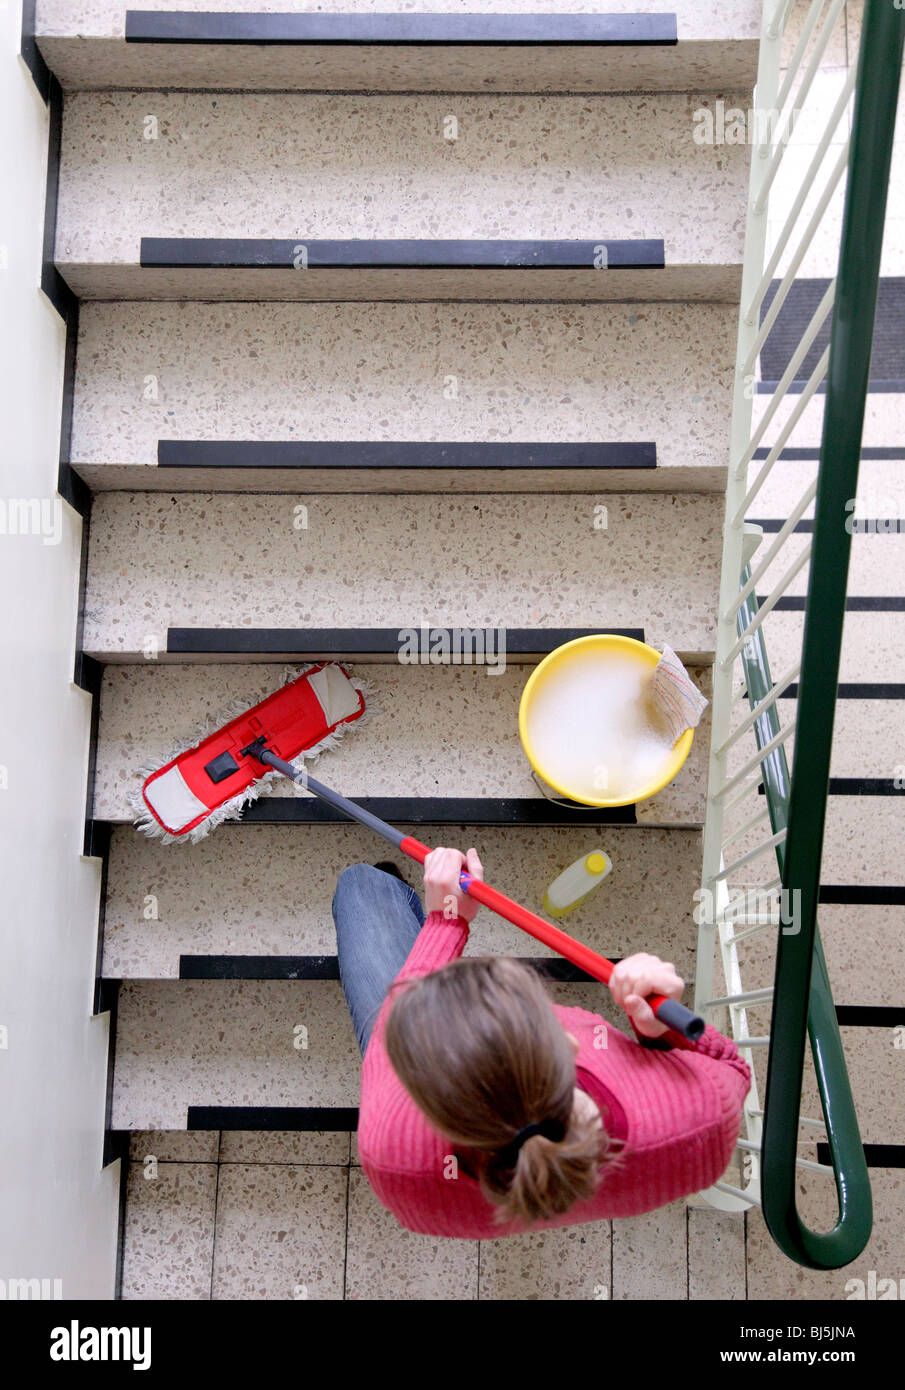 Cleaner cleaning a stairway. Stock Photo